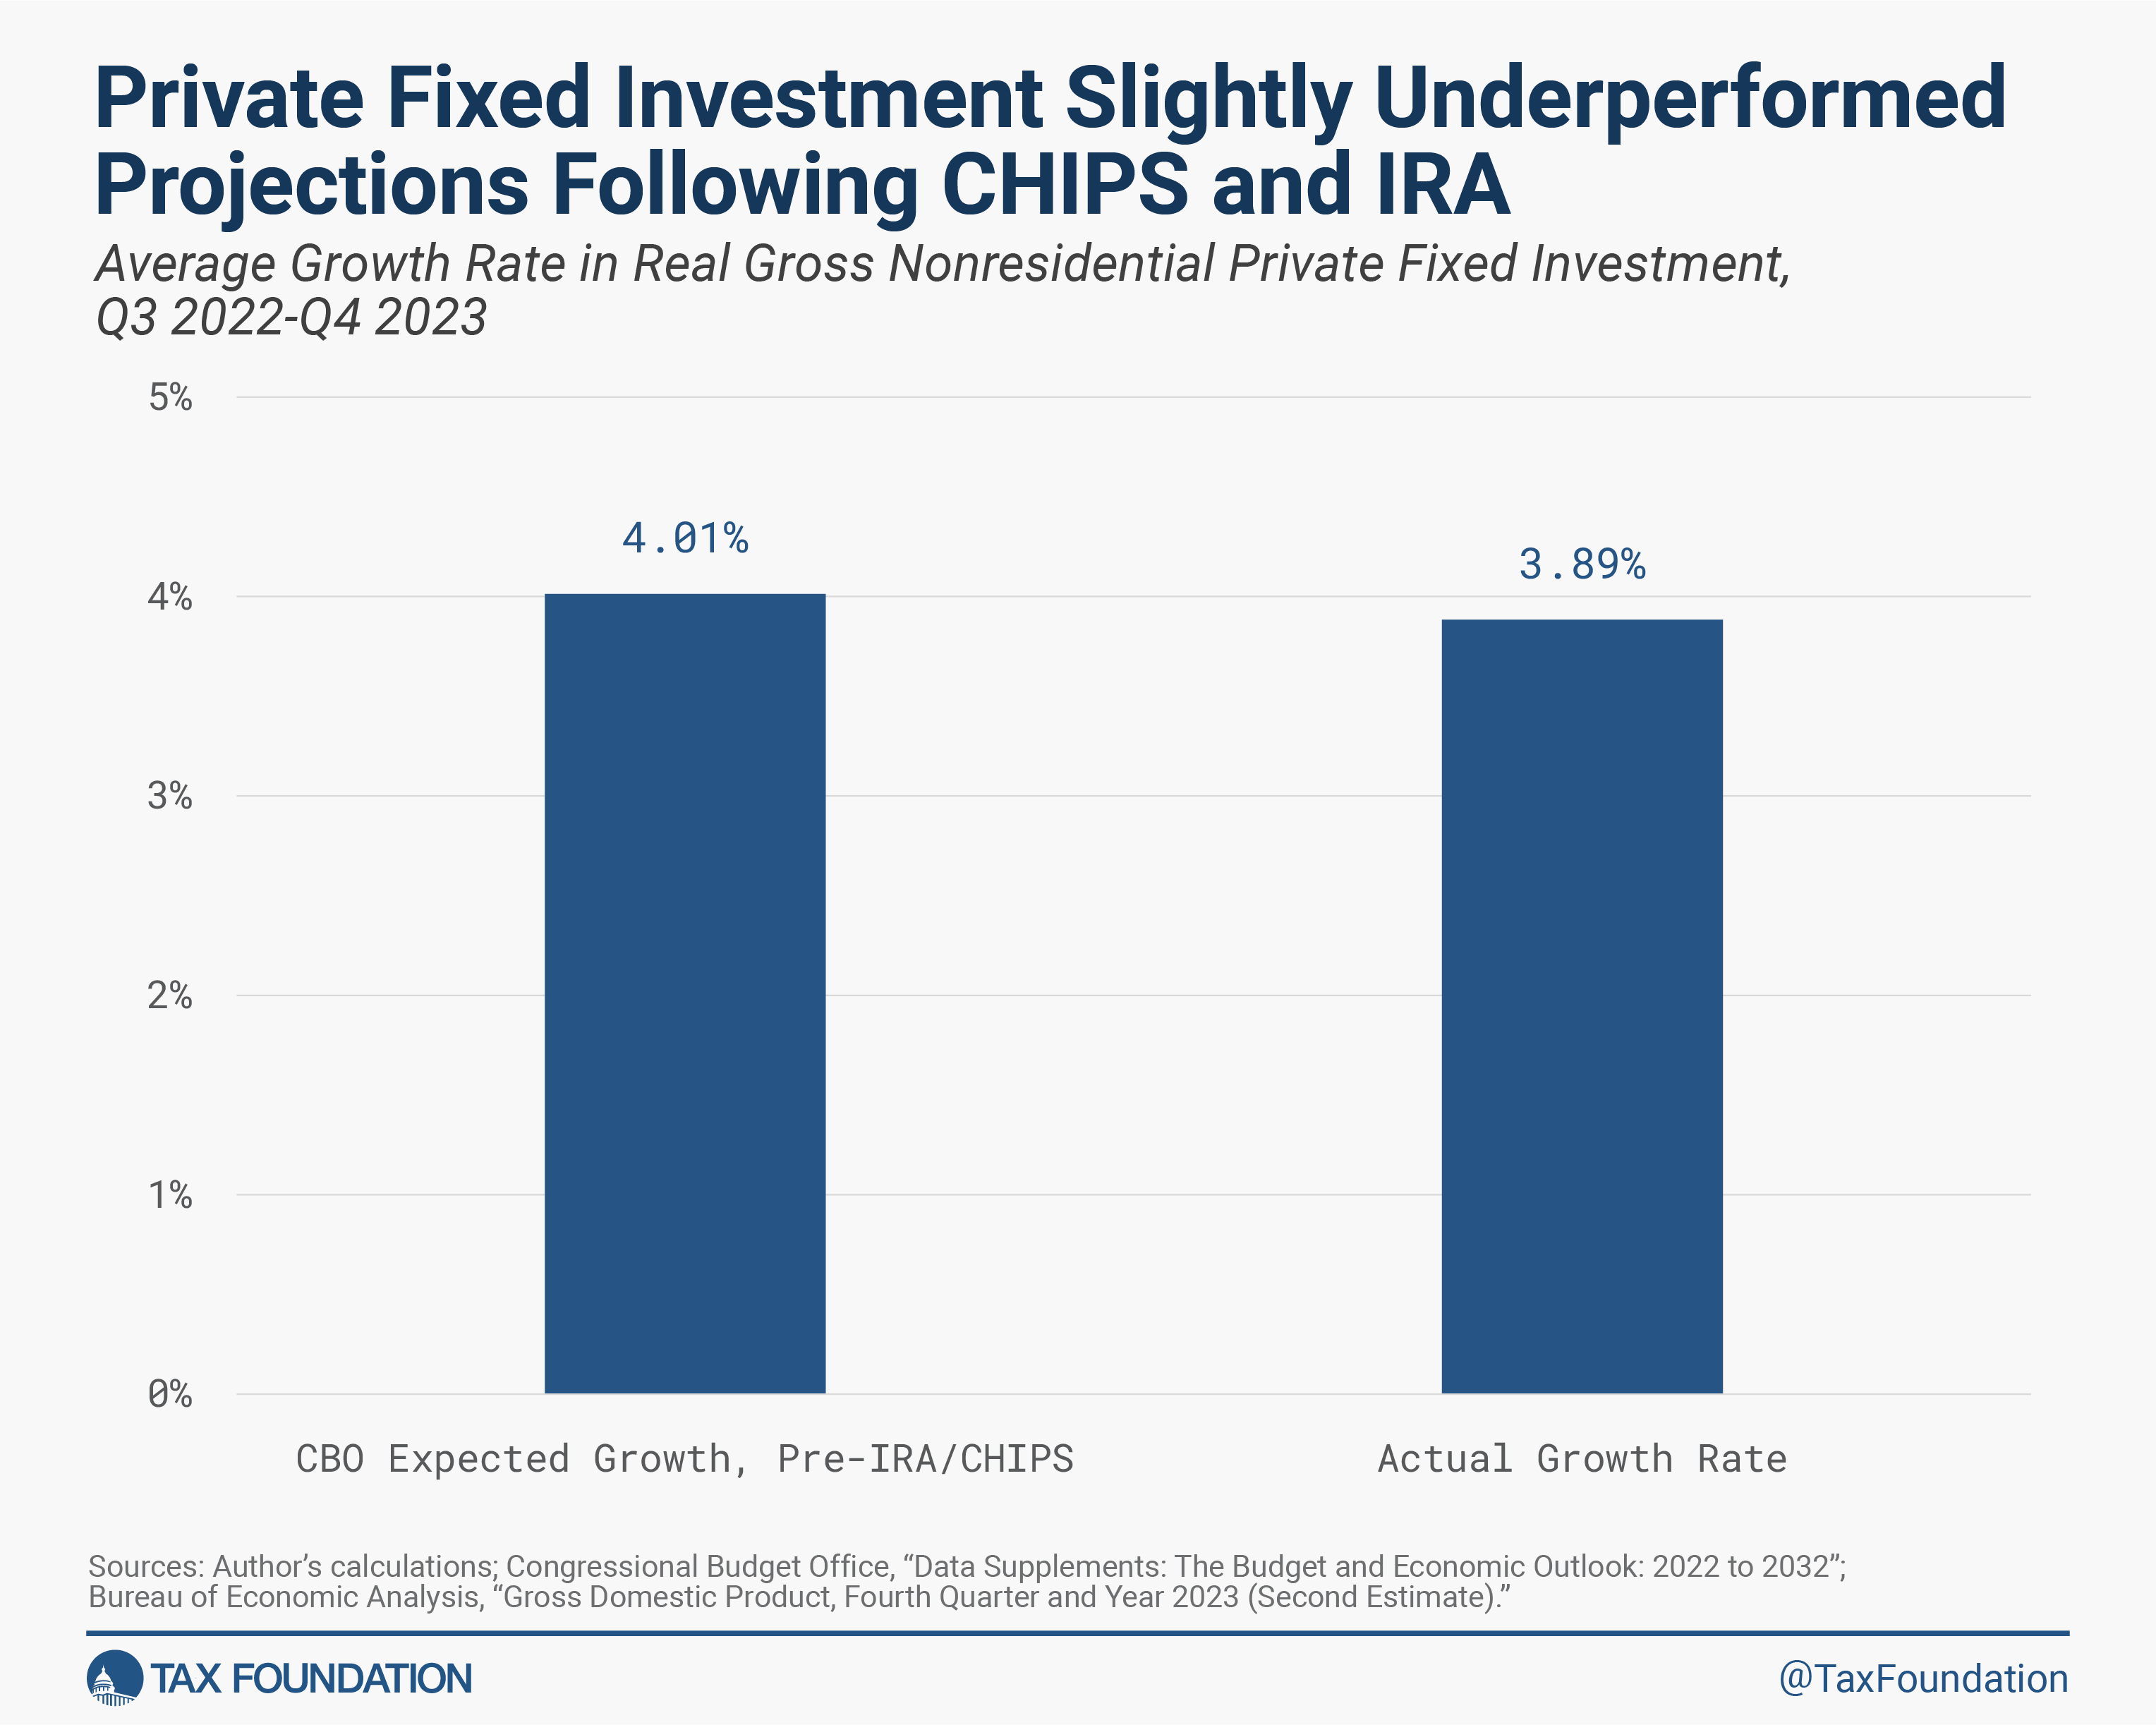 Private investment slightly underperformed following the CHIPS Act and Inflation Reduction Act